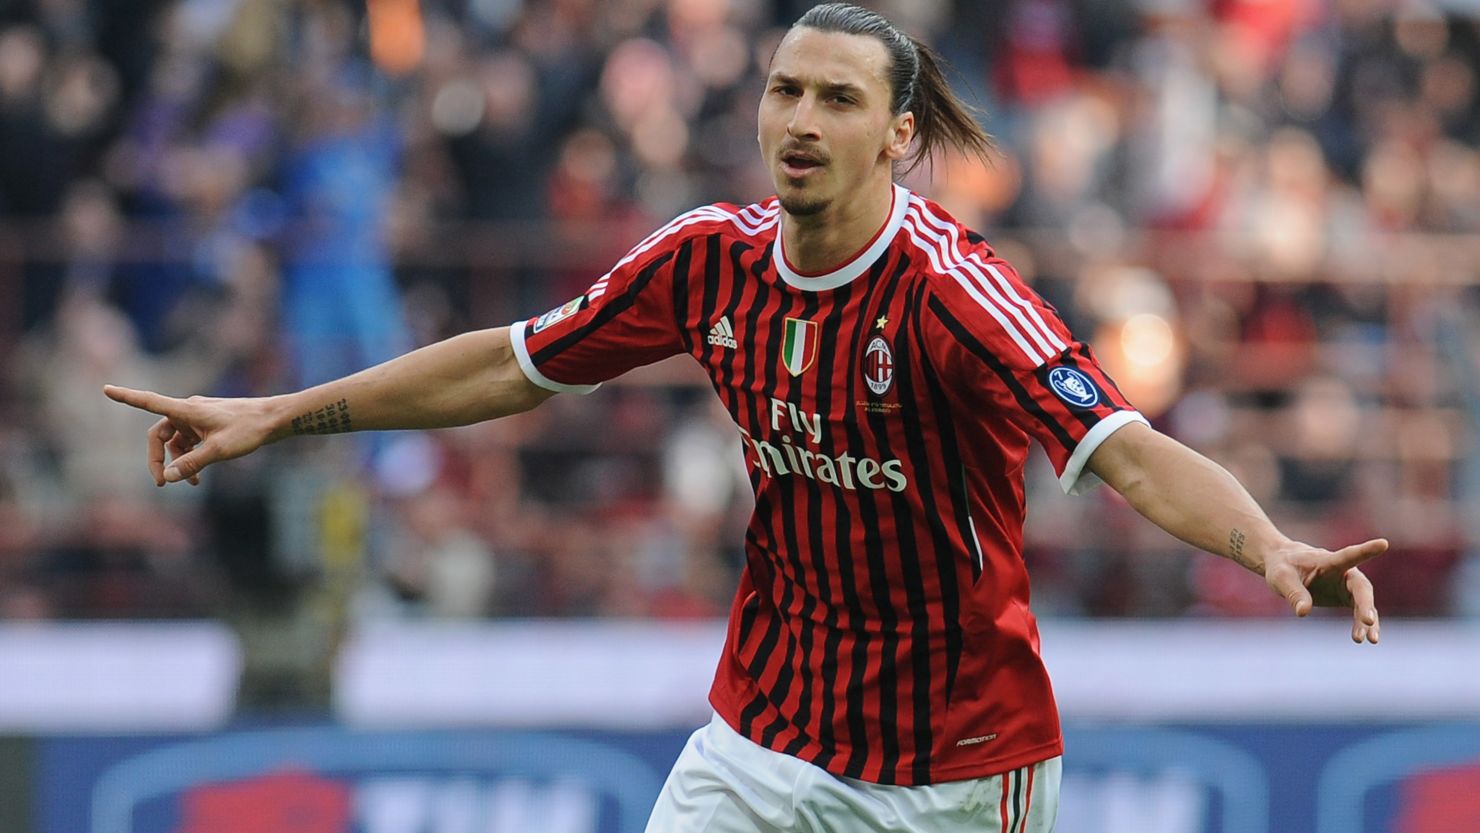 Zlatan Ibrahimovic was one of the scorers as Milan extended their Serie A lead to four points.